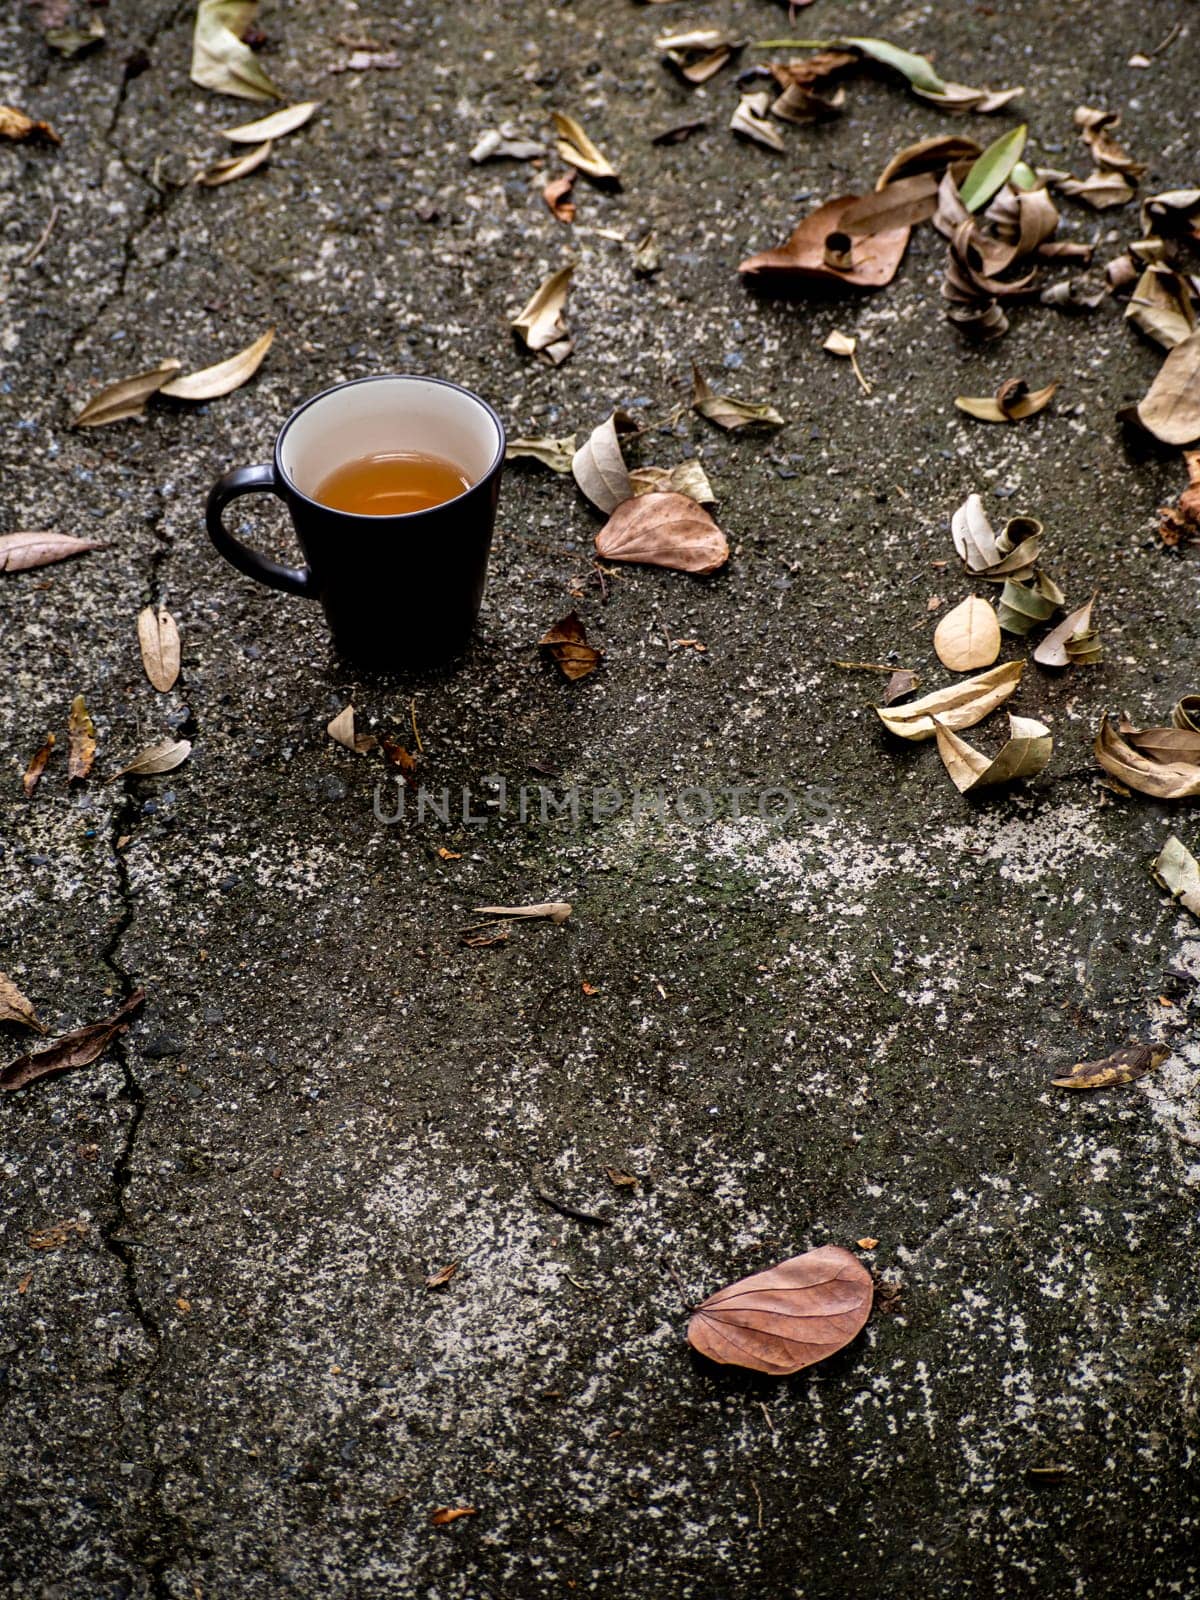 A cup of hot tea rests on the rough ground and fallen leaves